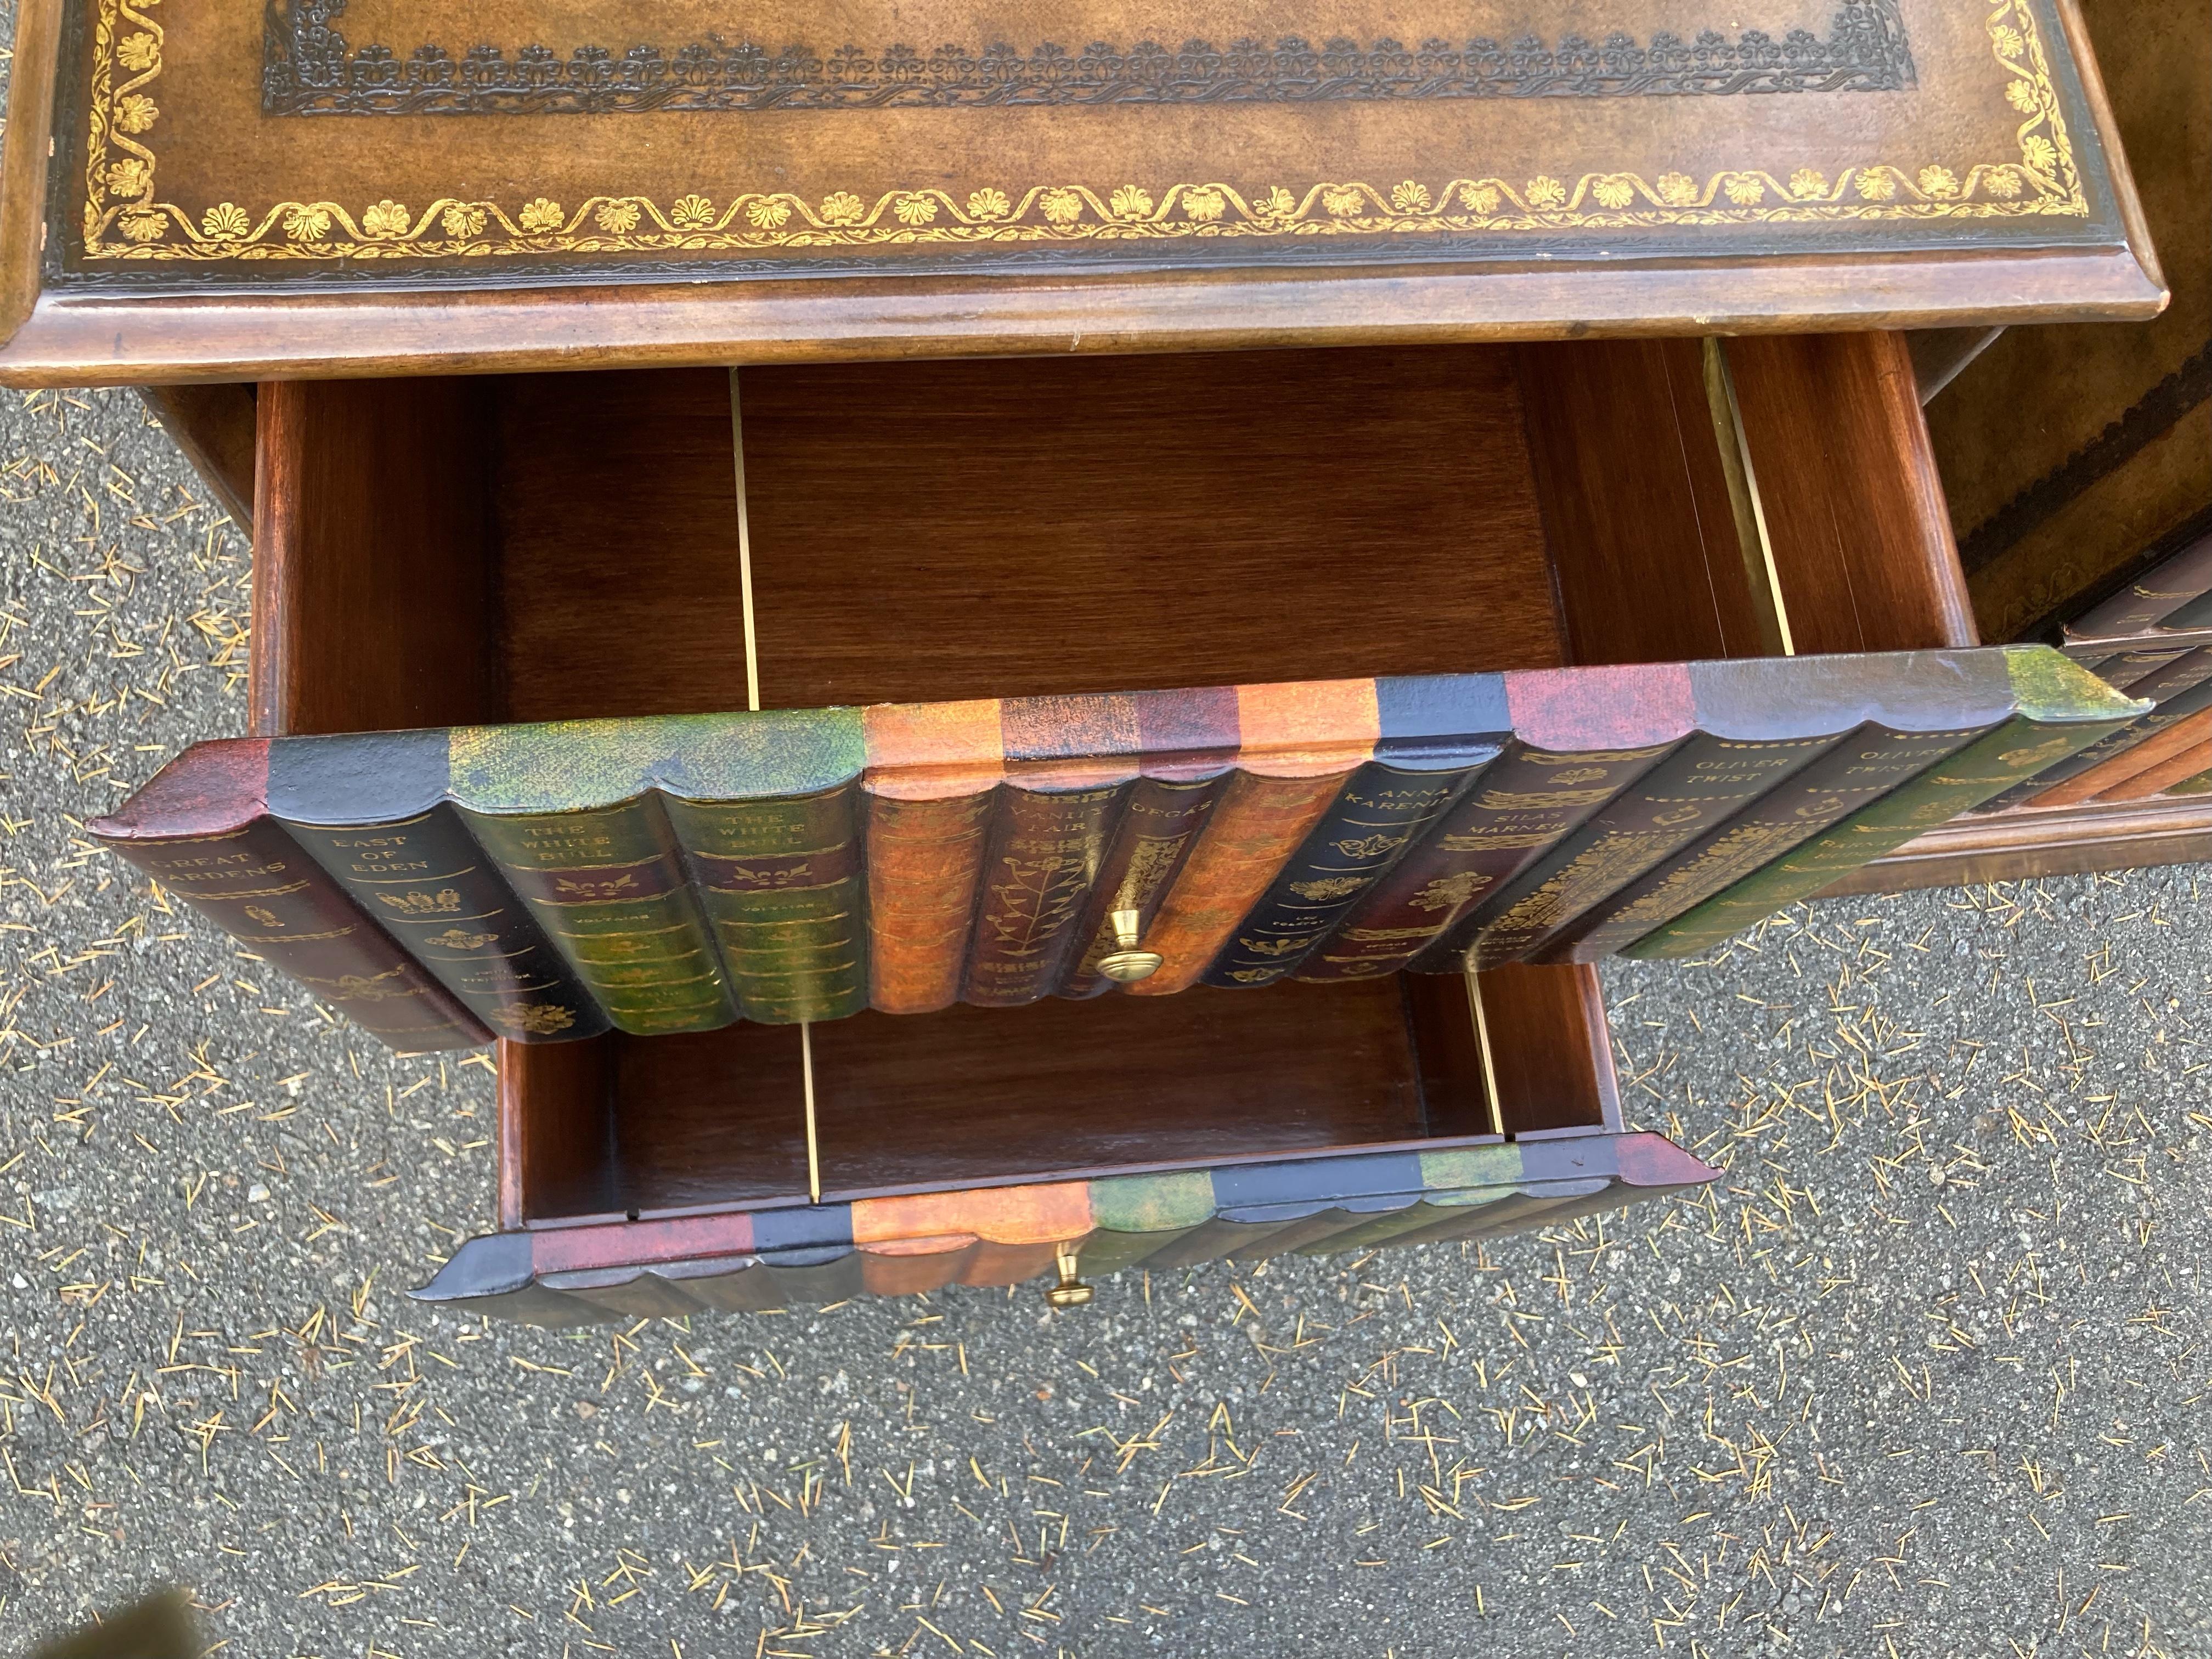 Pair of wonderfully versatile tooled leather 2 drawer file cabinets or end side tables /night stands by Maitland Smith having trompe l'oeil leather book bindings on the front of drawers. Very good condition with some minor nicks as shown in close